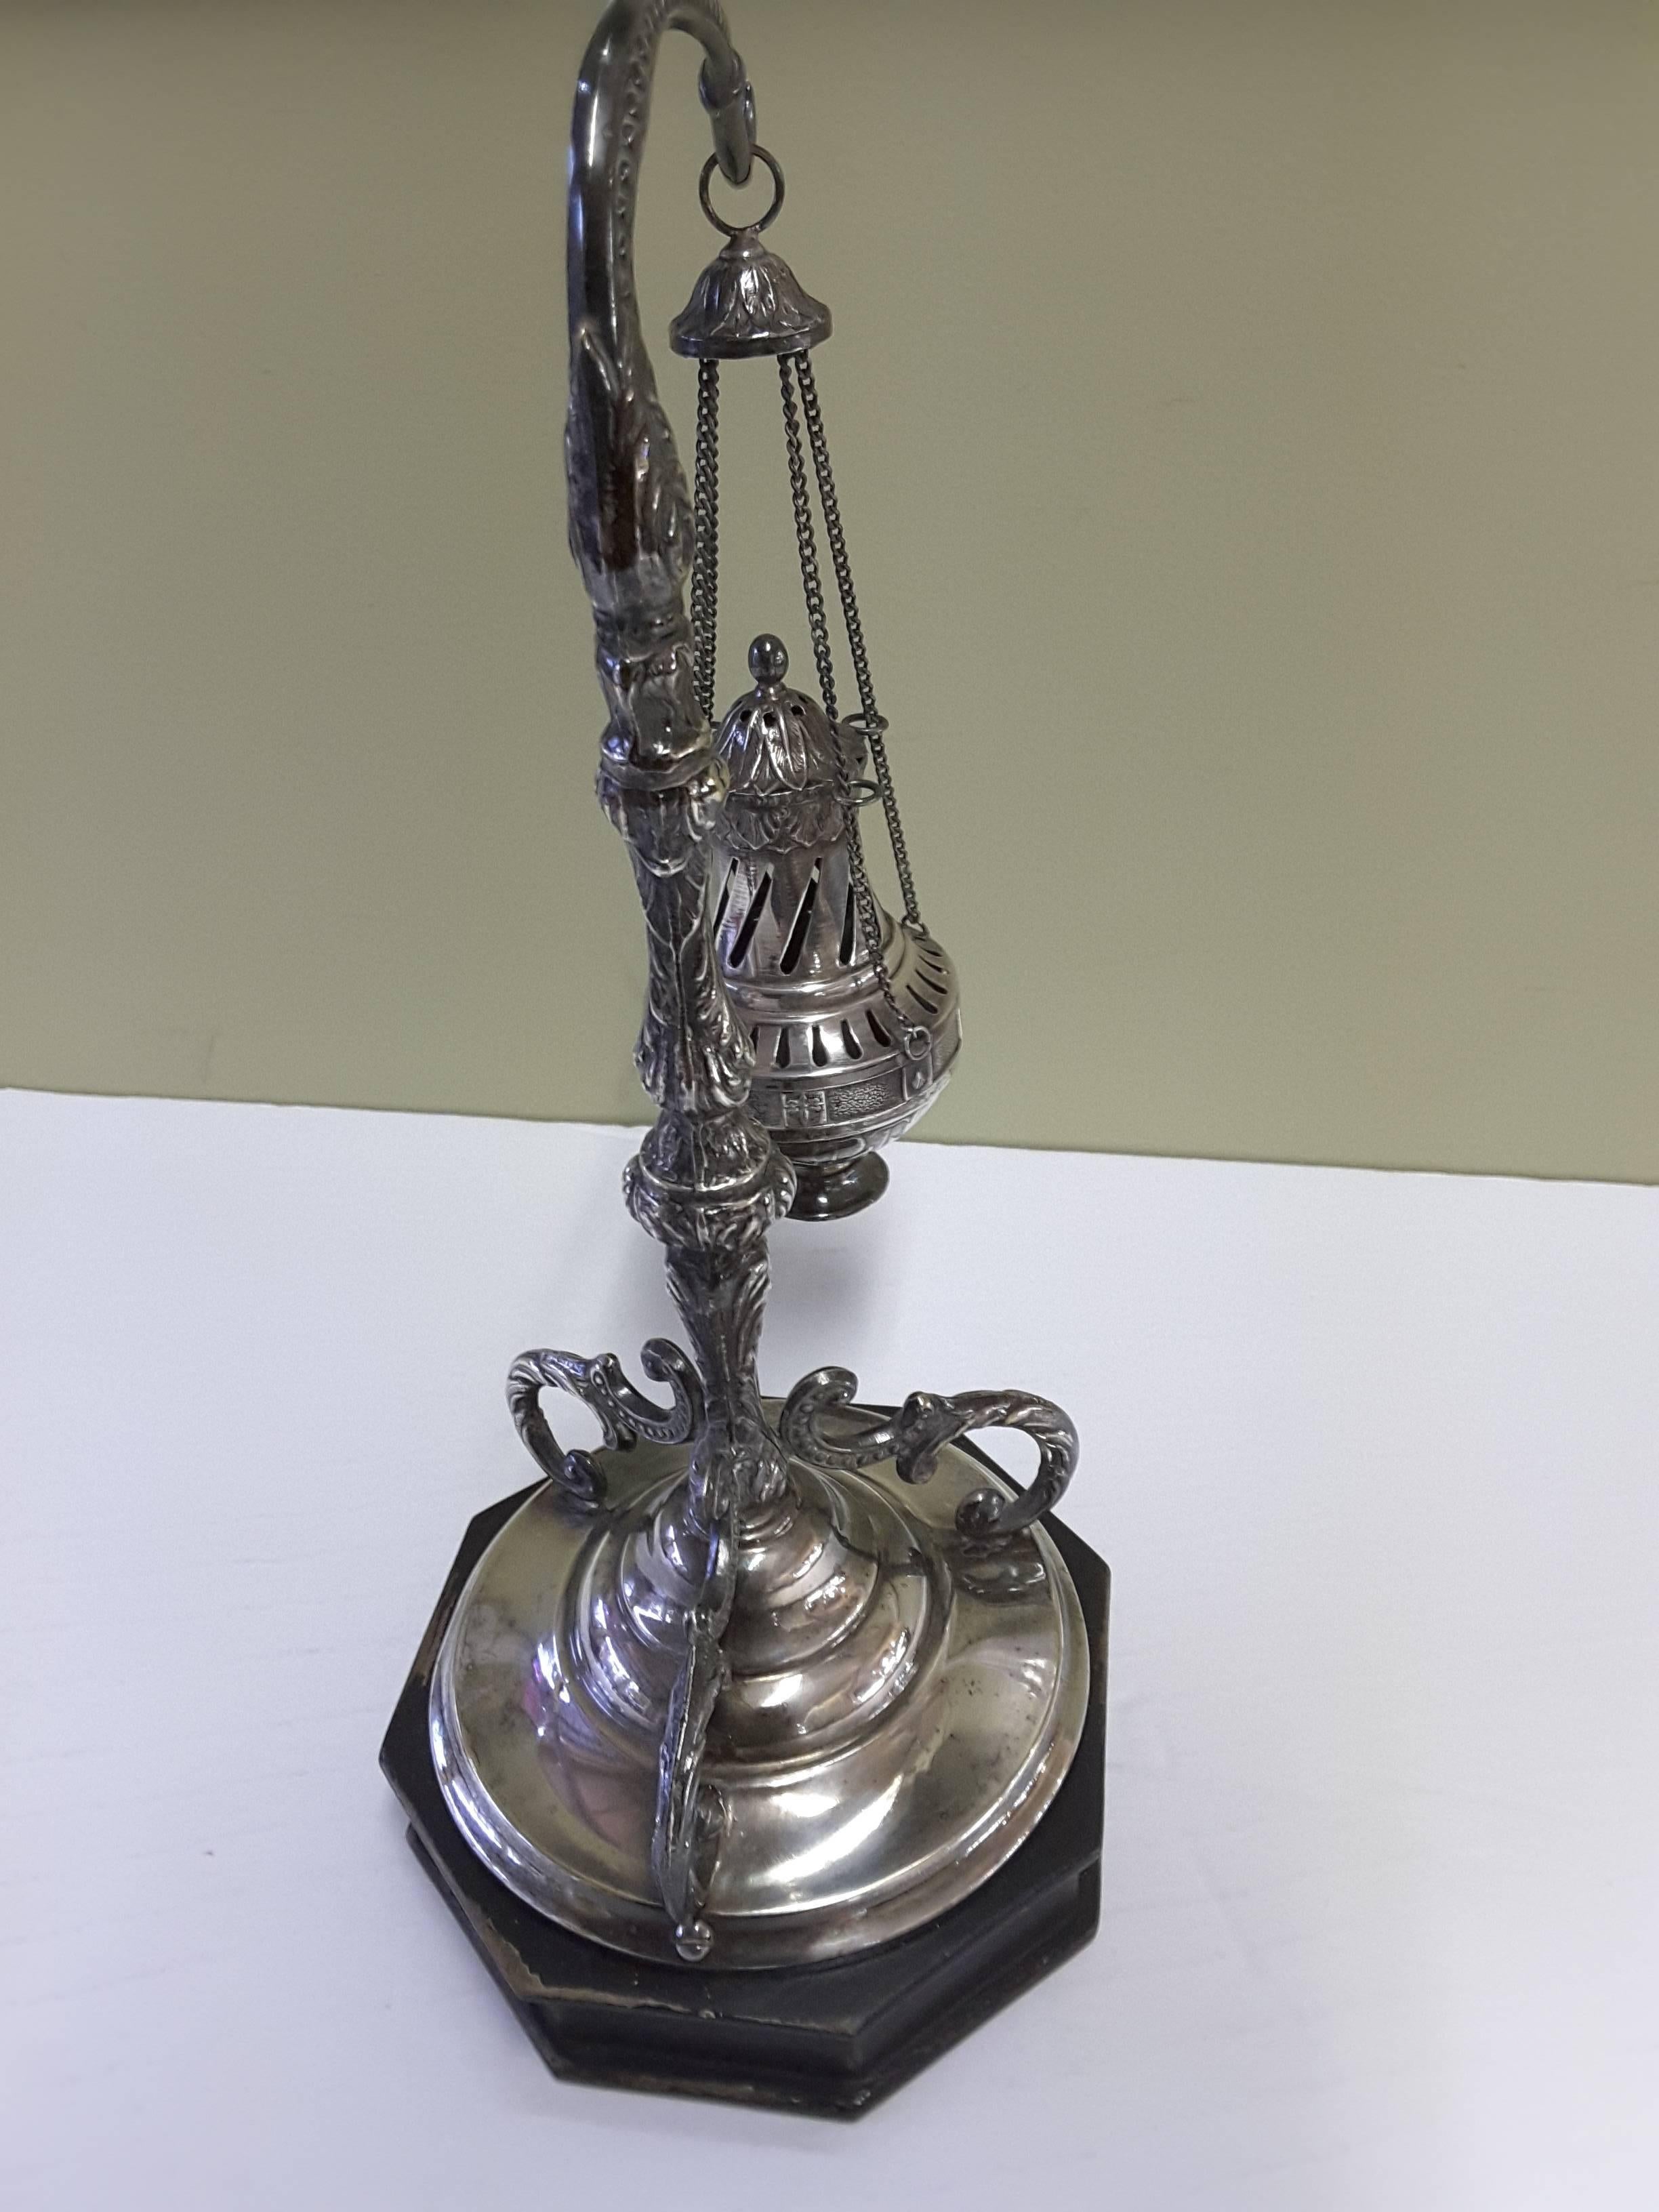 A fine antique Spanish silver Thurible (Censer), circa 1900, done in continental silver 800-850, mounted on an ebonized octagonal base. A swing four chain censor hangs from the decorated arm and mounts to the base.
A small scale replica of a